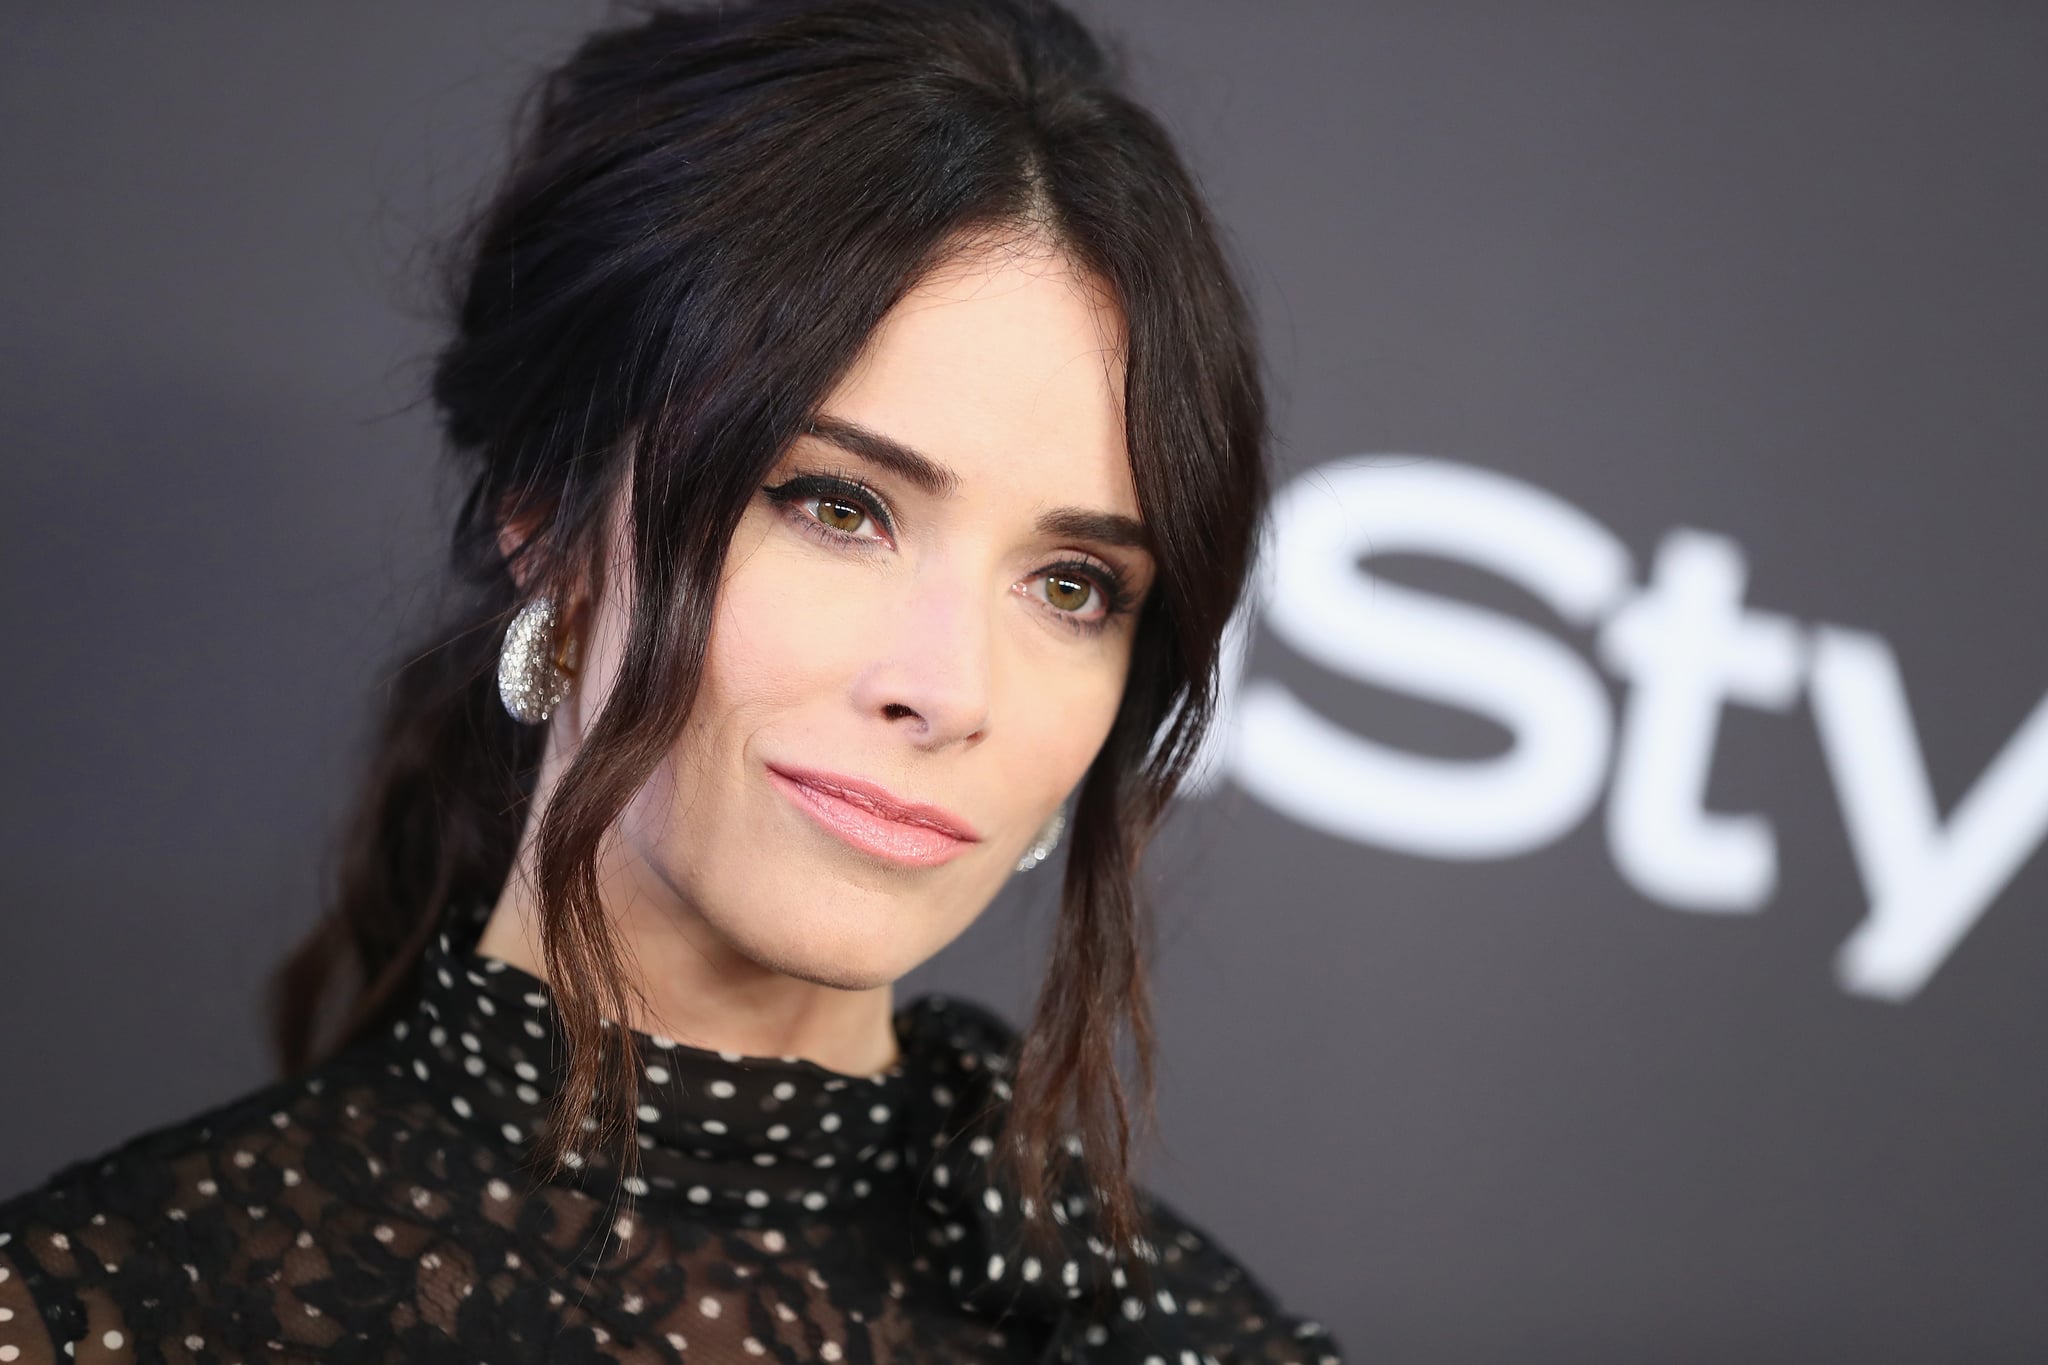 BEVERLY HILLS, CA - JANUARY 06:  Abigail Spencer attends the InStyle And Warner Bros. Golden Globes After Party 2019 at The Beverly Hilton Hotel on January 6, 2019 in Beverly Hills, California.  (Photo by Rich Fury/Getty Images)